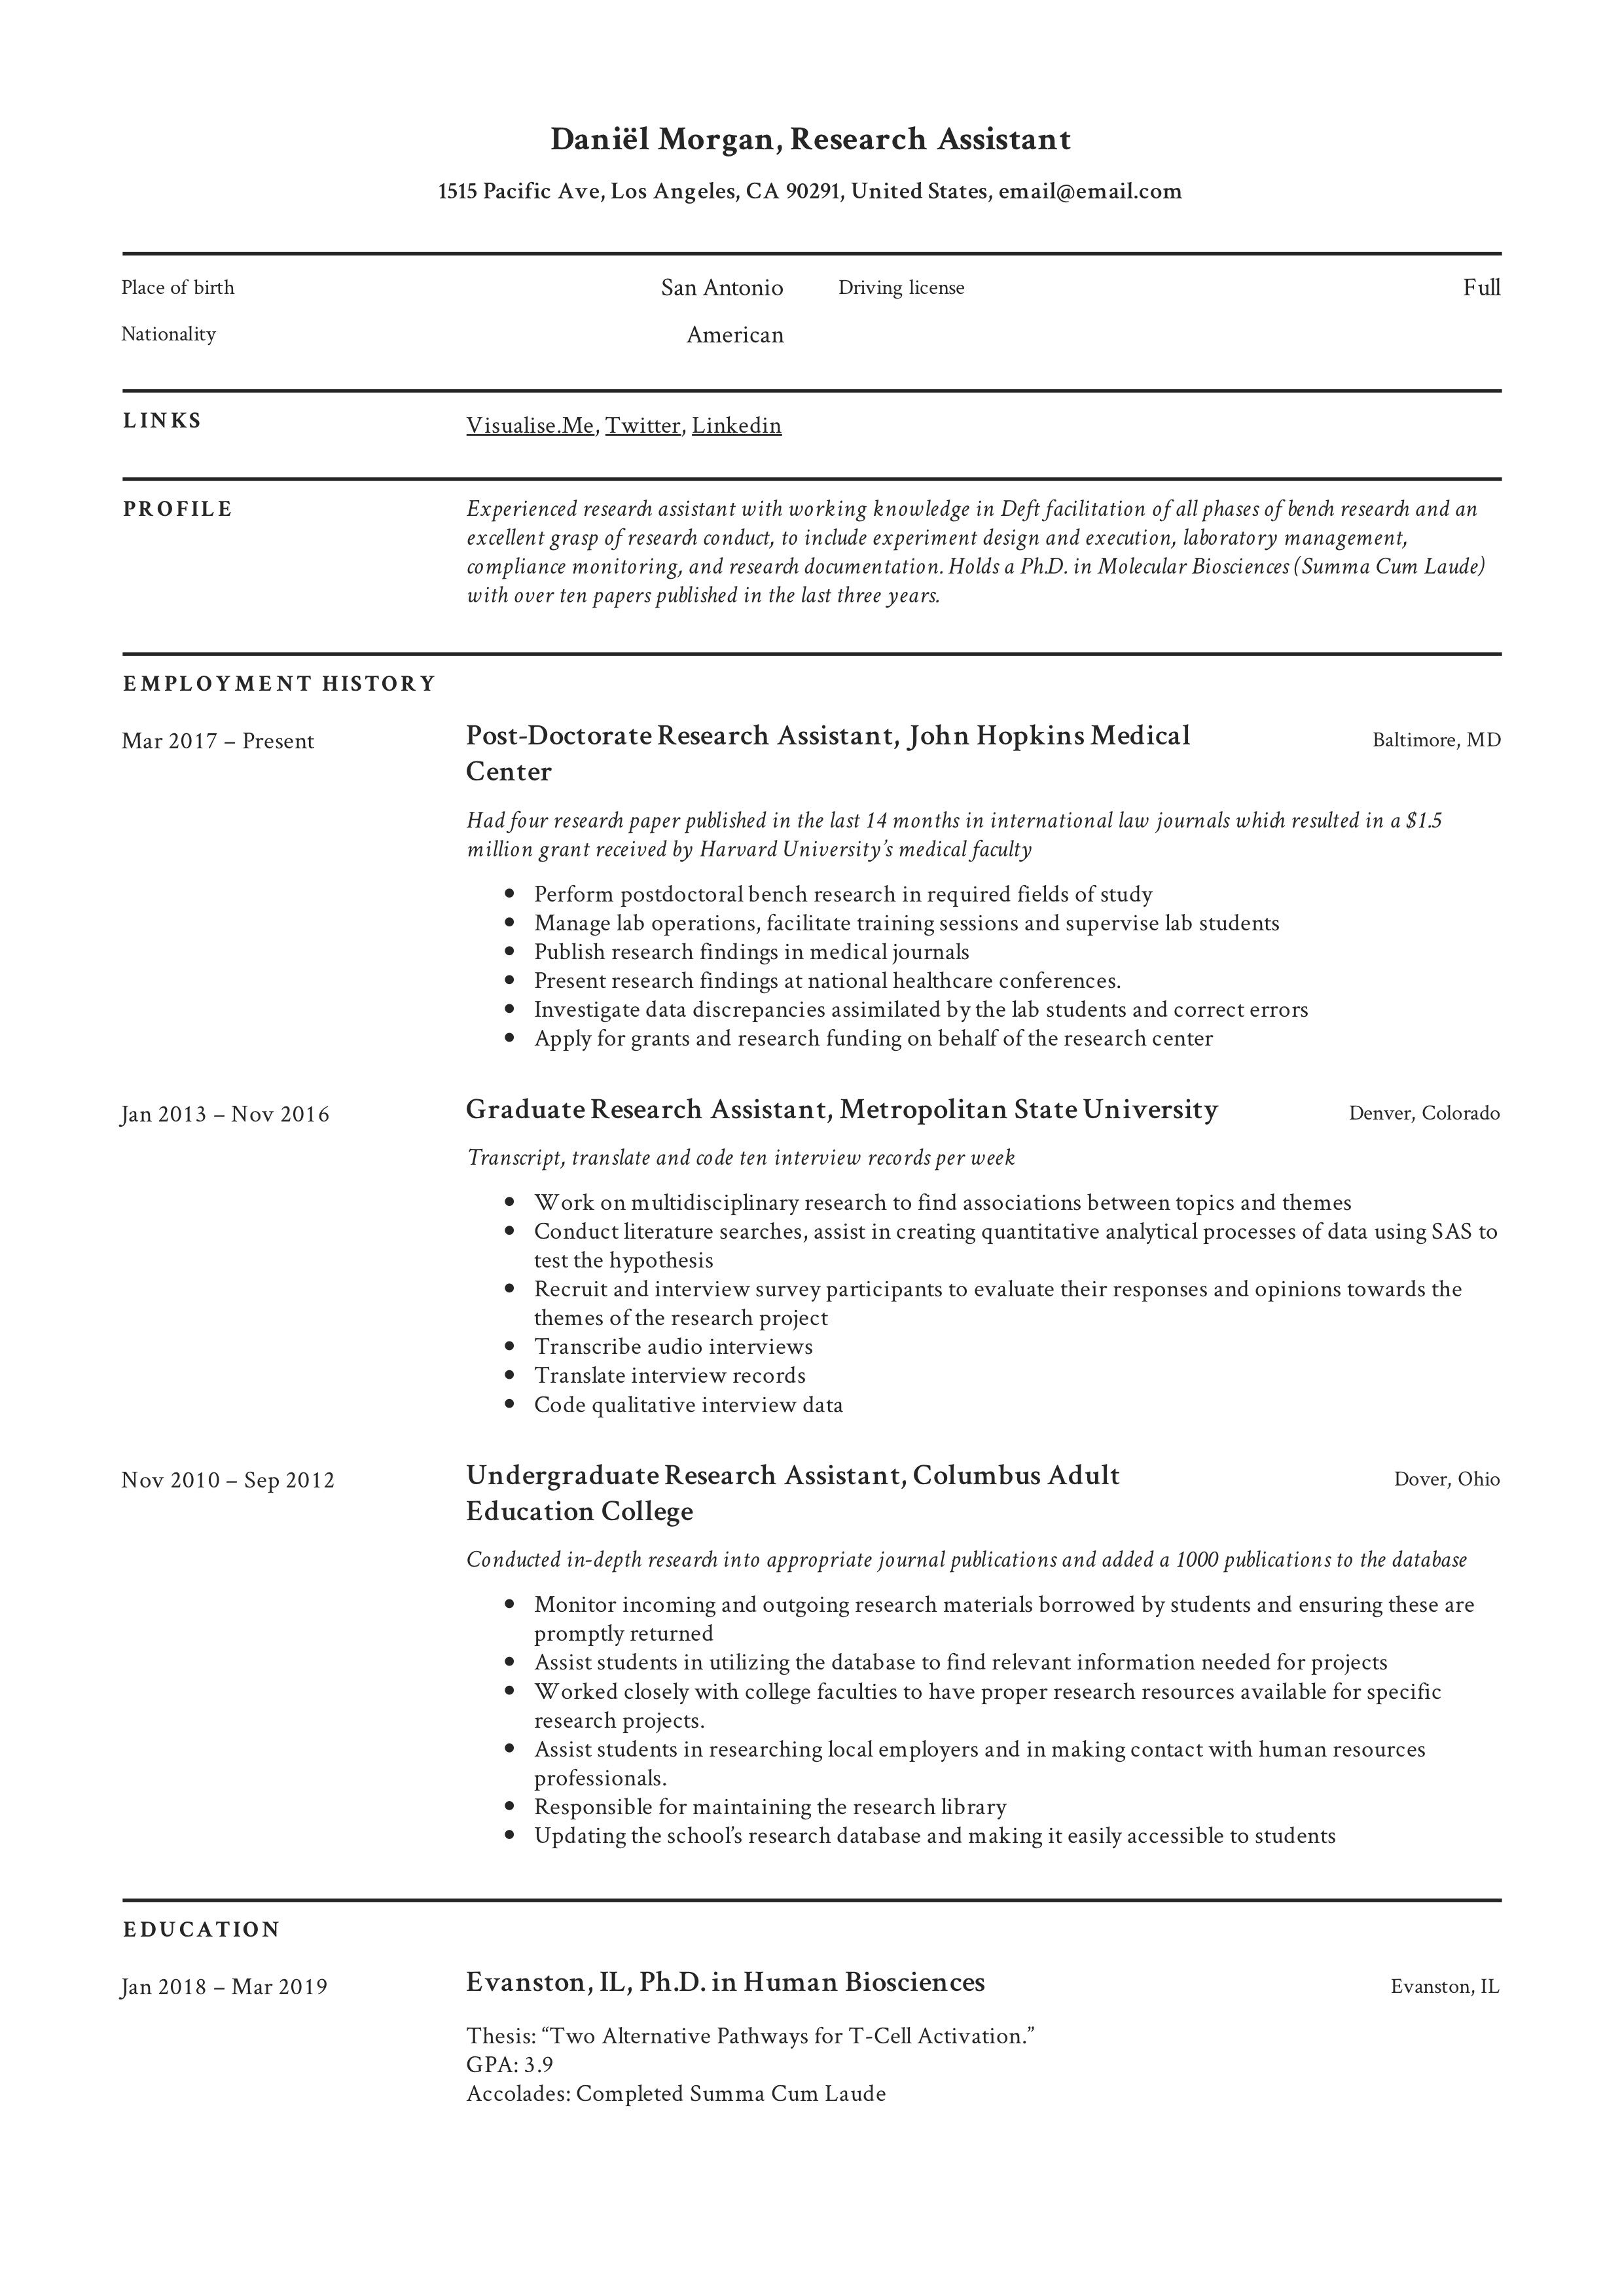 Research Assistant Resume Template Research Assistant Medical Assistant Resume Student Resume Template